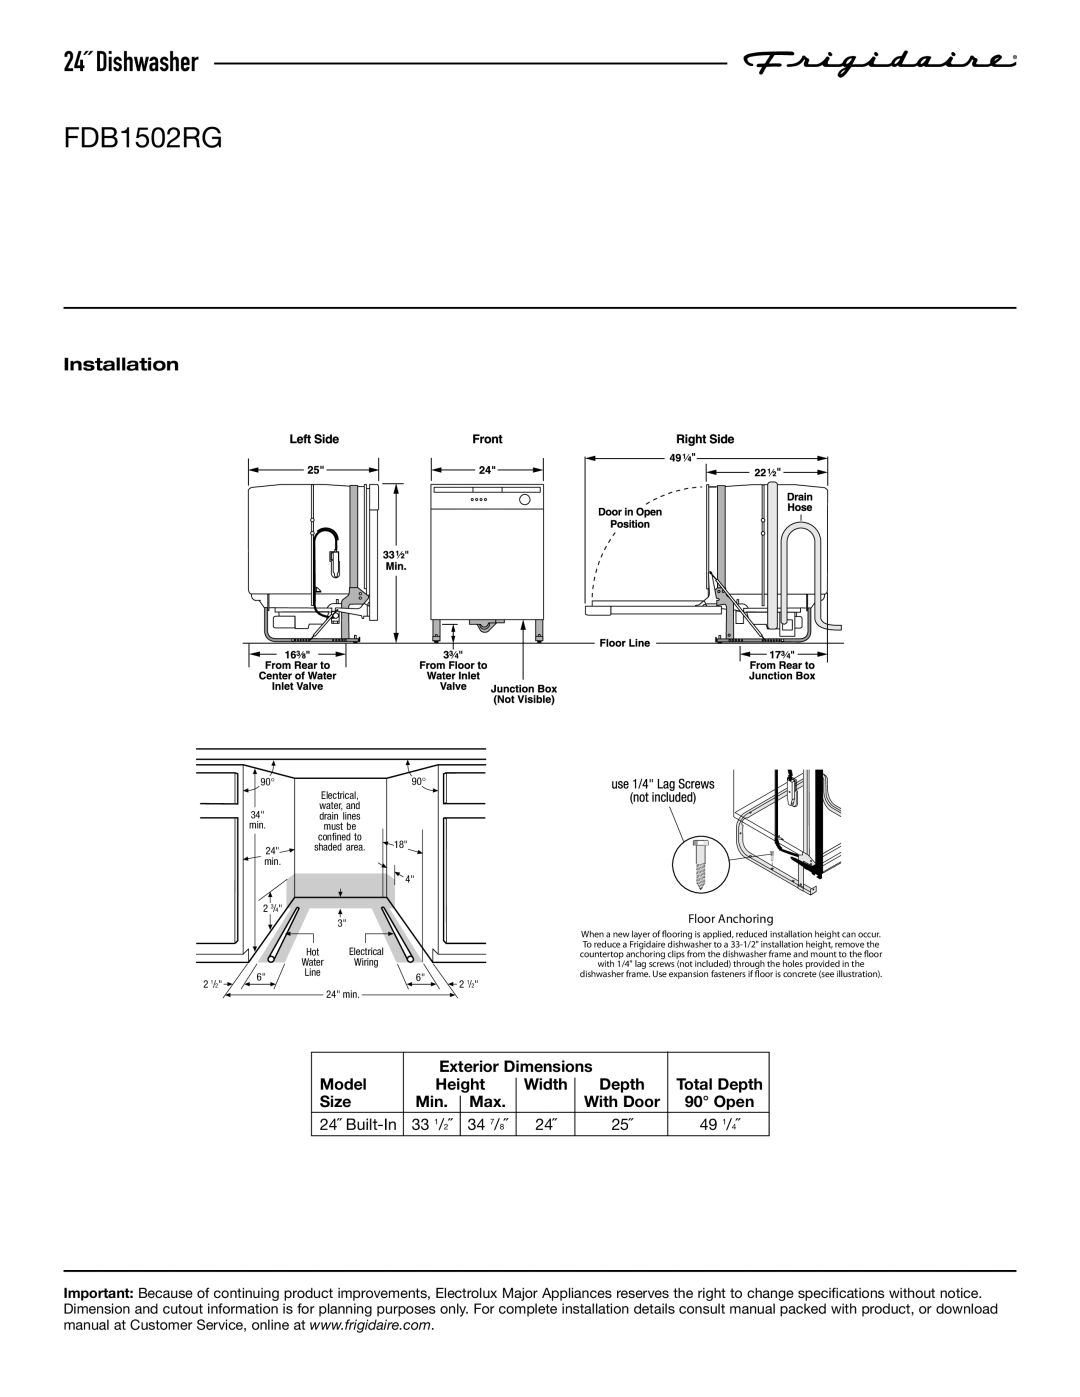 Frigidaire specifications 24˝ Dishwasher FDB1502RG, Installation, Exterior Dimensions, Model, Height, Width, Depth 